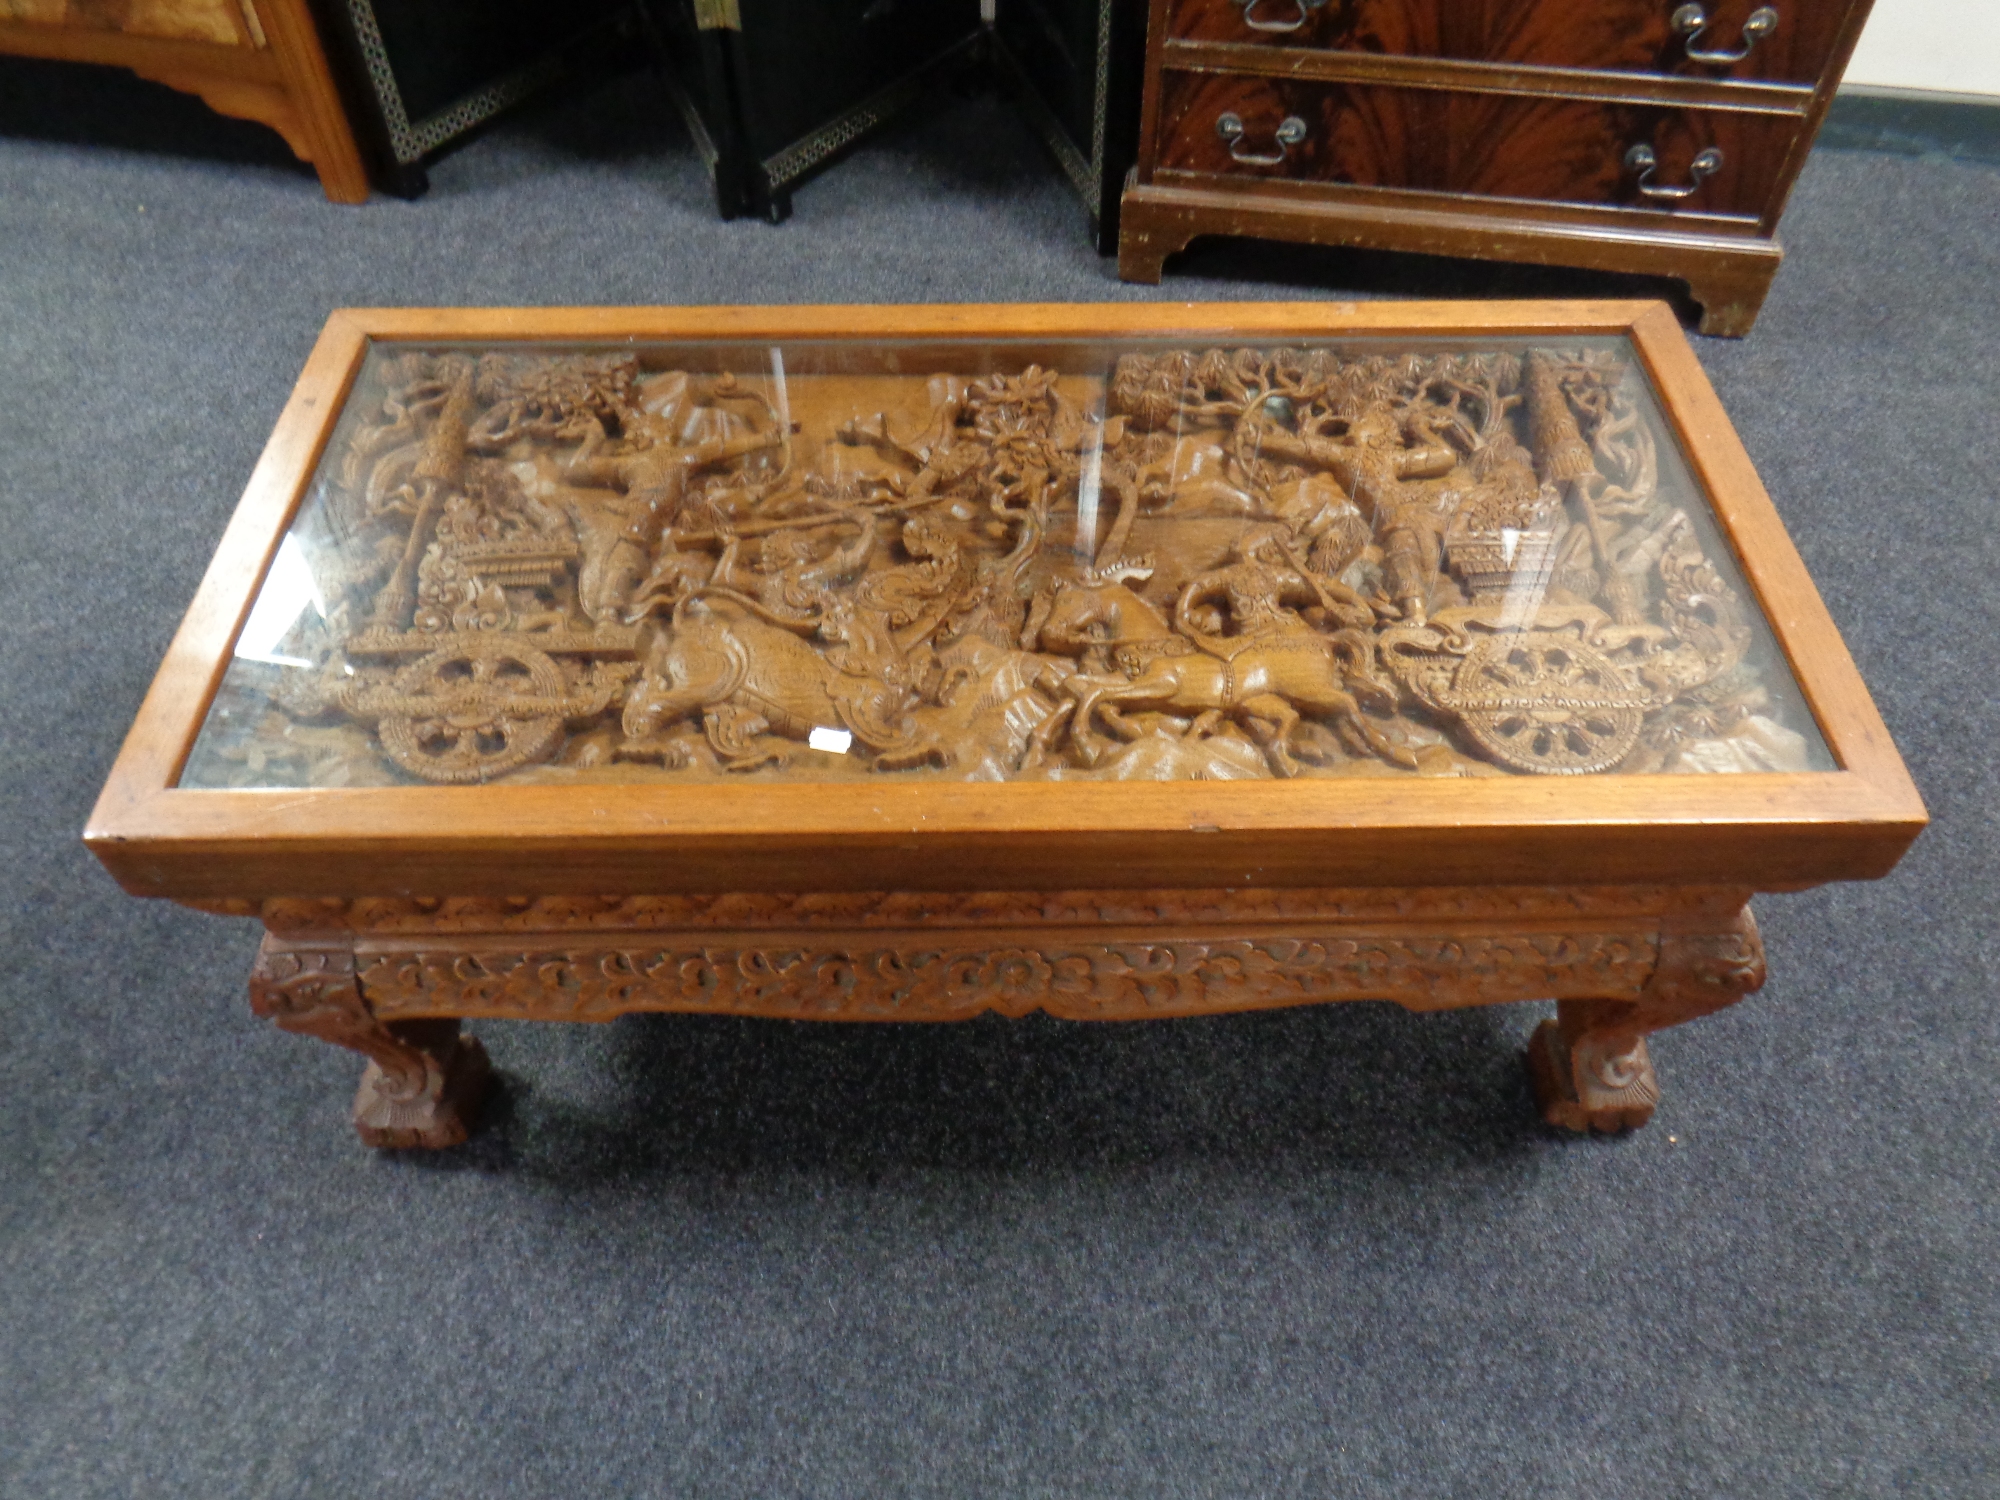 A heavily carved Thai rectangular coffee table with glass top